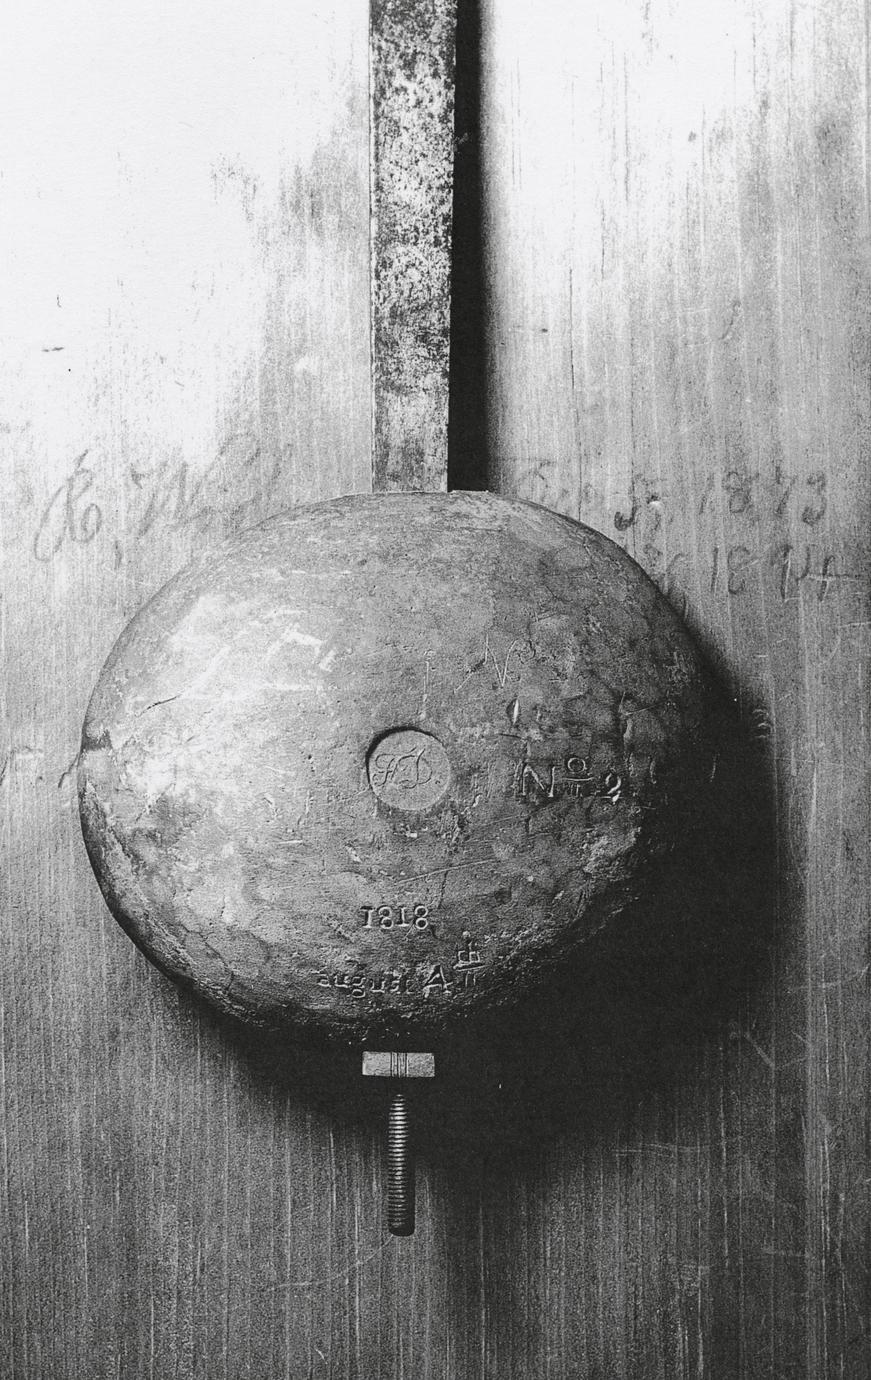 Black and white photograph of a silent clock pendulum.